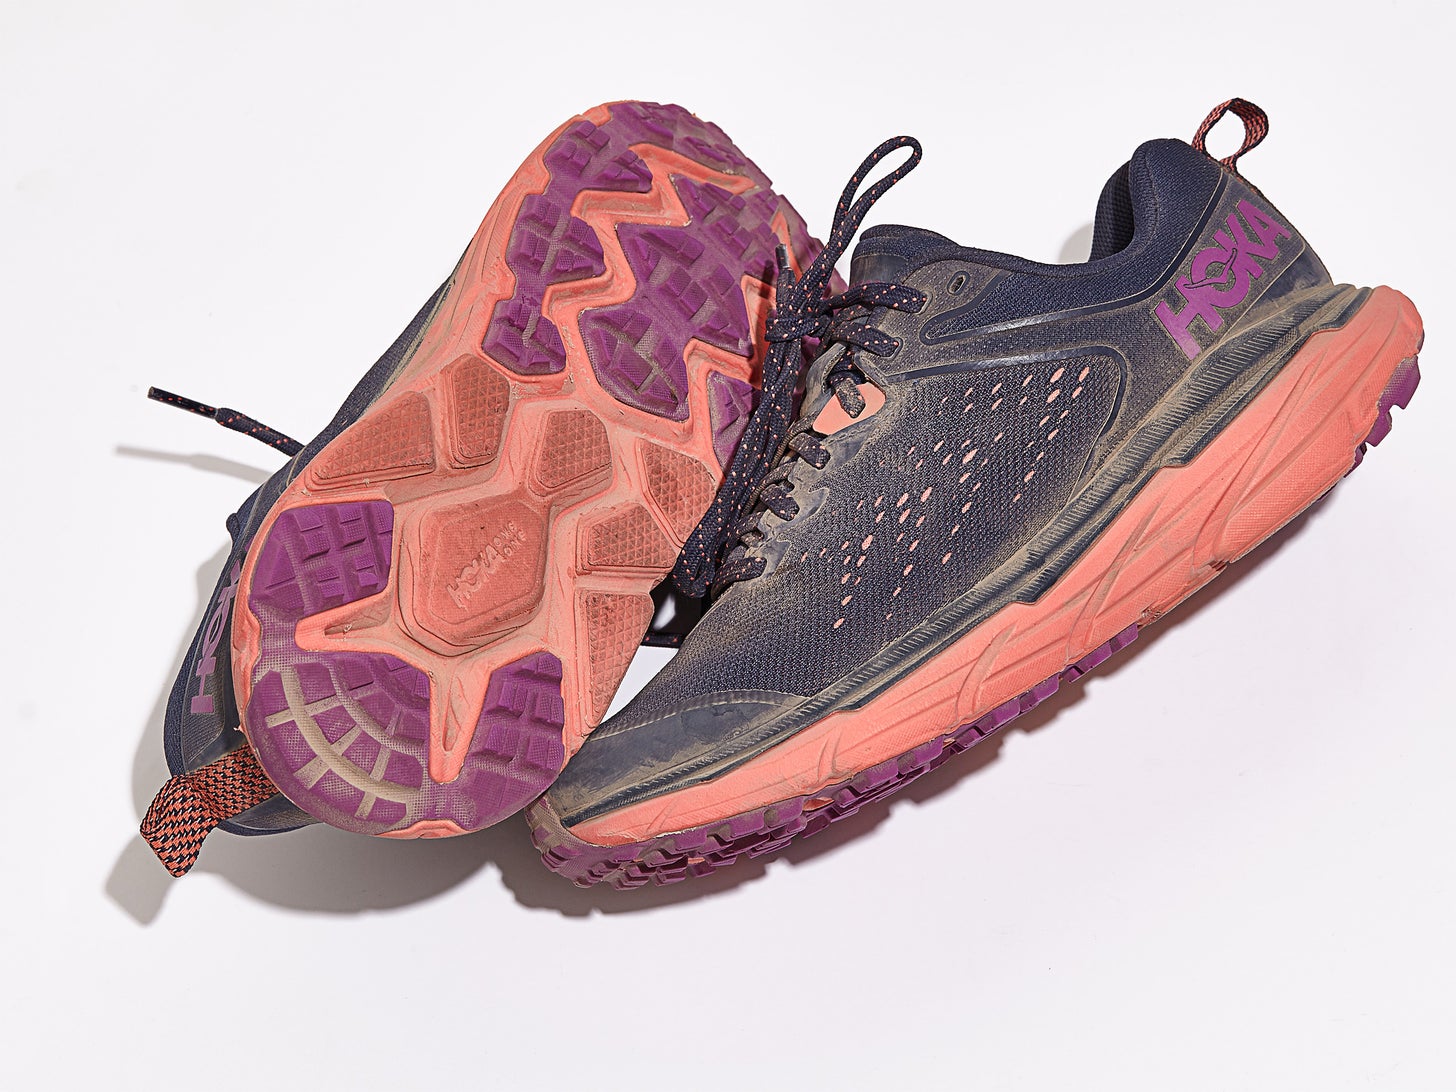 HOKA Challenger ATR 6: Best Road to Trail running Shoe for Wide feet